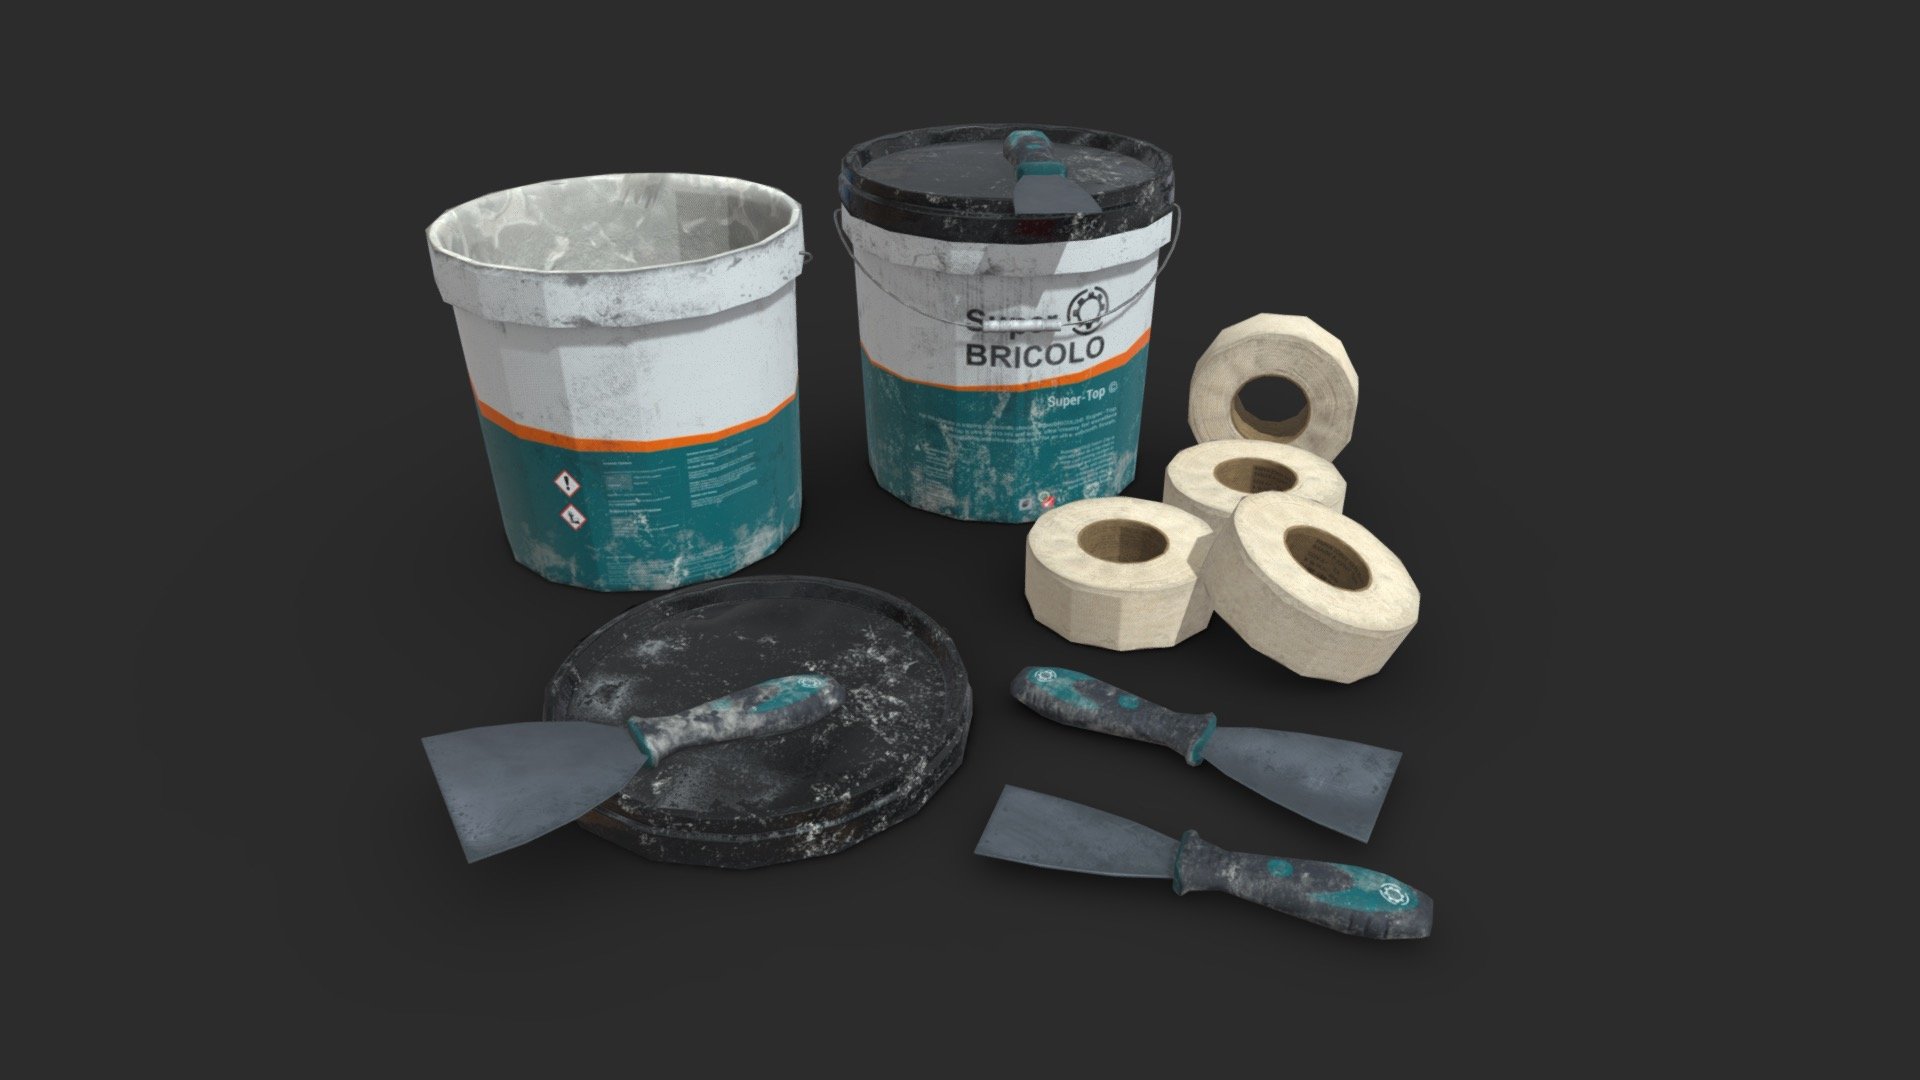 This Plaster tools and bucket set includes 4 LODs and colliders. This set includes 6 individual objects (bucket &amp; lib, joint roller &amp; knifes), the set also includes 4 prefab assets. Those tools elements are ready for game and available in lowpoly and PBR ready.

The assets are available in realistic style and can be used in any game (post-apo, first person shooter, GTA like, construction… ). All objects share a unique material for the best optimization for games.

Low-poly model &amp; Blender native 2.93

SPECIFICATIONS




Objects : 6

Polygons : 830

Subdivision ready : No

Render engine : Eevee (Cycles ready)

GAME SPECS




LODs : Yes (inside FBX for Unity &amp; Unreal)

Numbers of LODs : 4

Collider : Yes

EXPORTED FORMATS




FBX

Collada

OBJ

GLTF

TEXTURES




Materials in scene : 1

Textures sizes : 4K

Textures types : Base Color, Metallic, Roughness, Normal (DirectX &amp; OpenGL), Heigh &amp; AO (also Unity &amp; Unreal ARM workflow maps)

Textures format : PNG
 - Top Coat Bucket and Tools - Buy Royalty Free 3D model by KangaroOz 3D (@KangaroOz-3D) 3d model